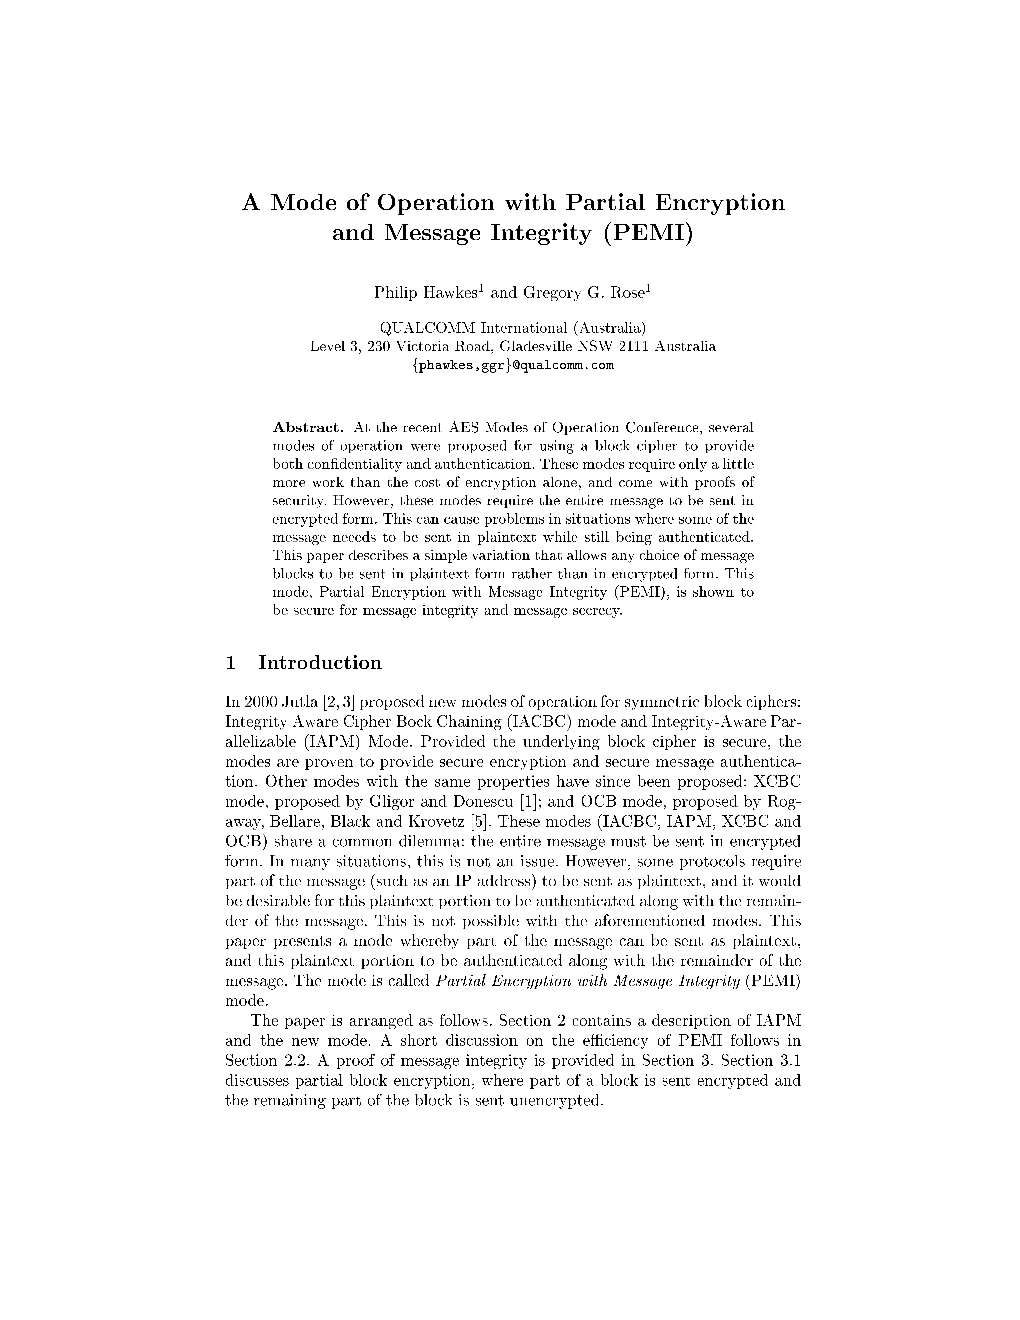 A Mode of Operation with Partial Encryption and Message Integrity